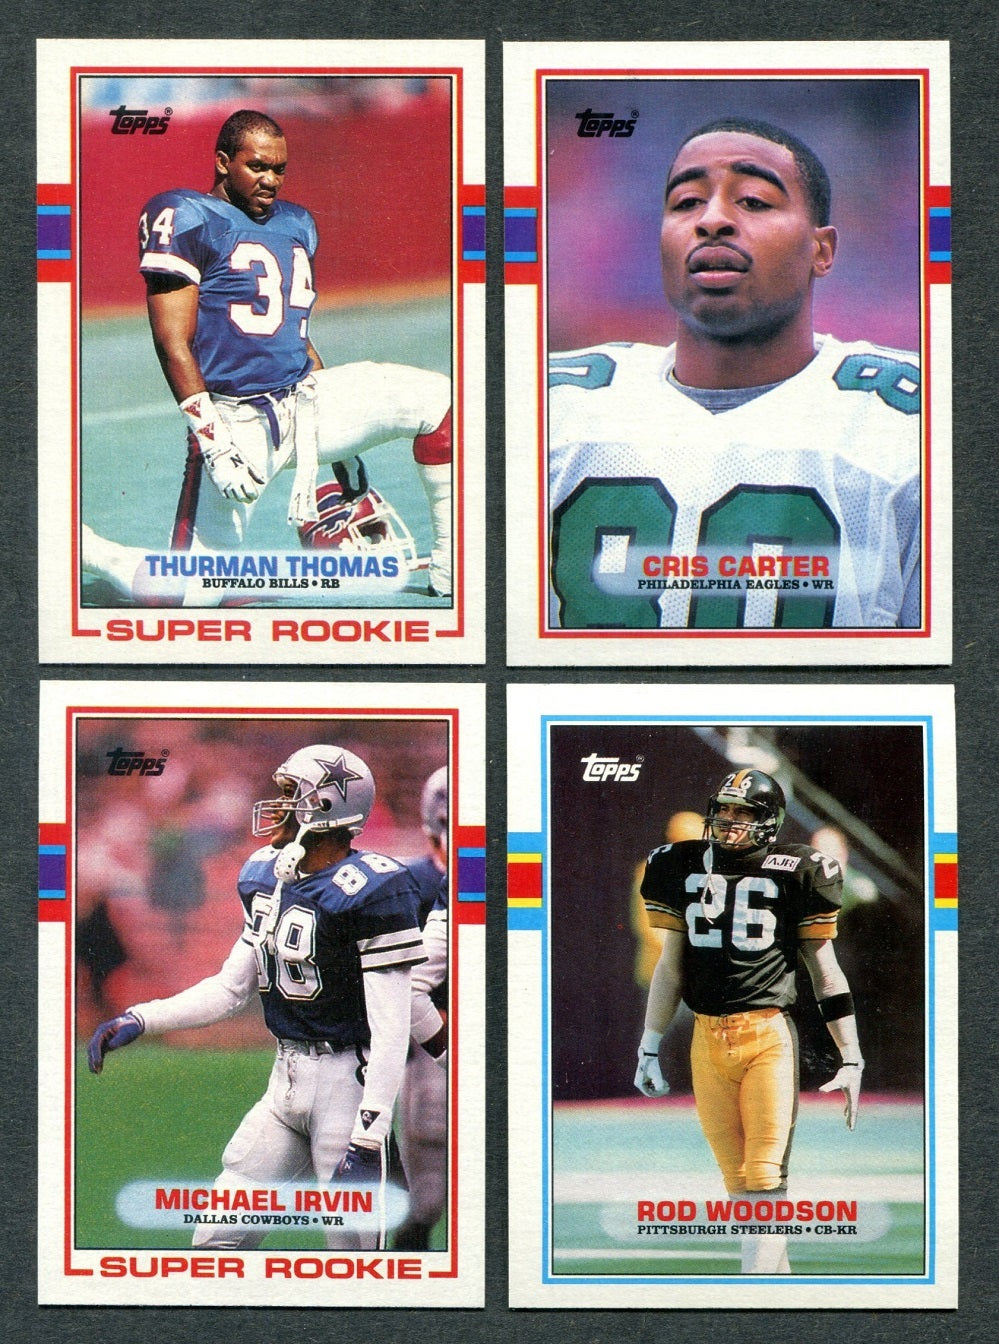 1989 Topps Football Complete Set NM/MT (396) (24-349)